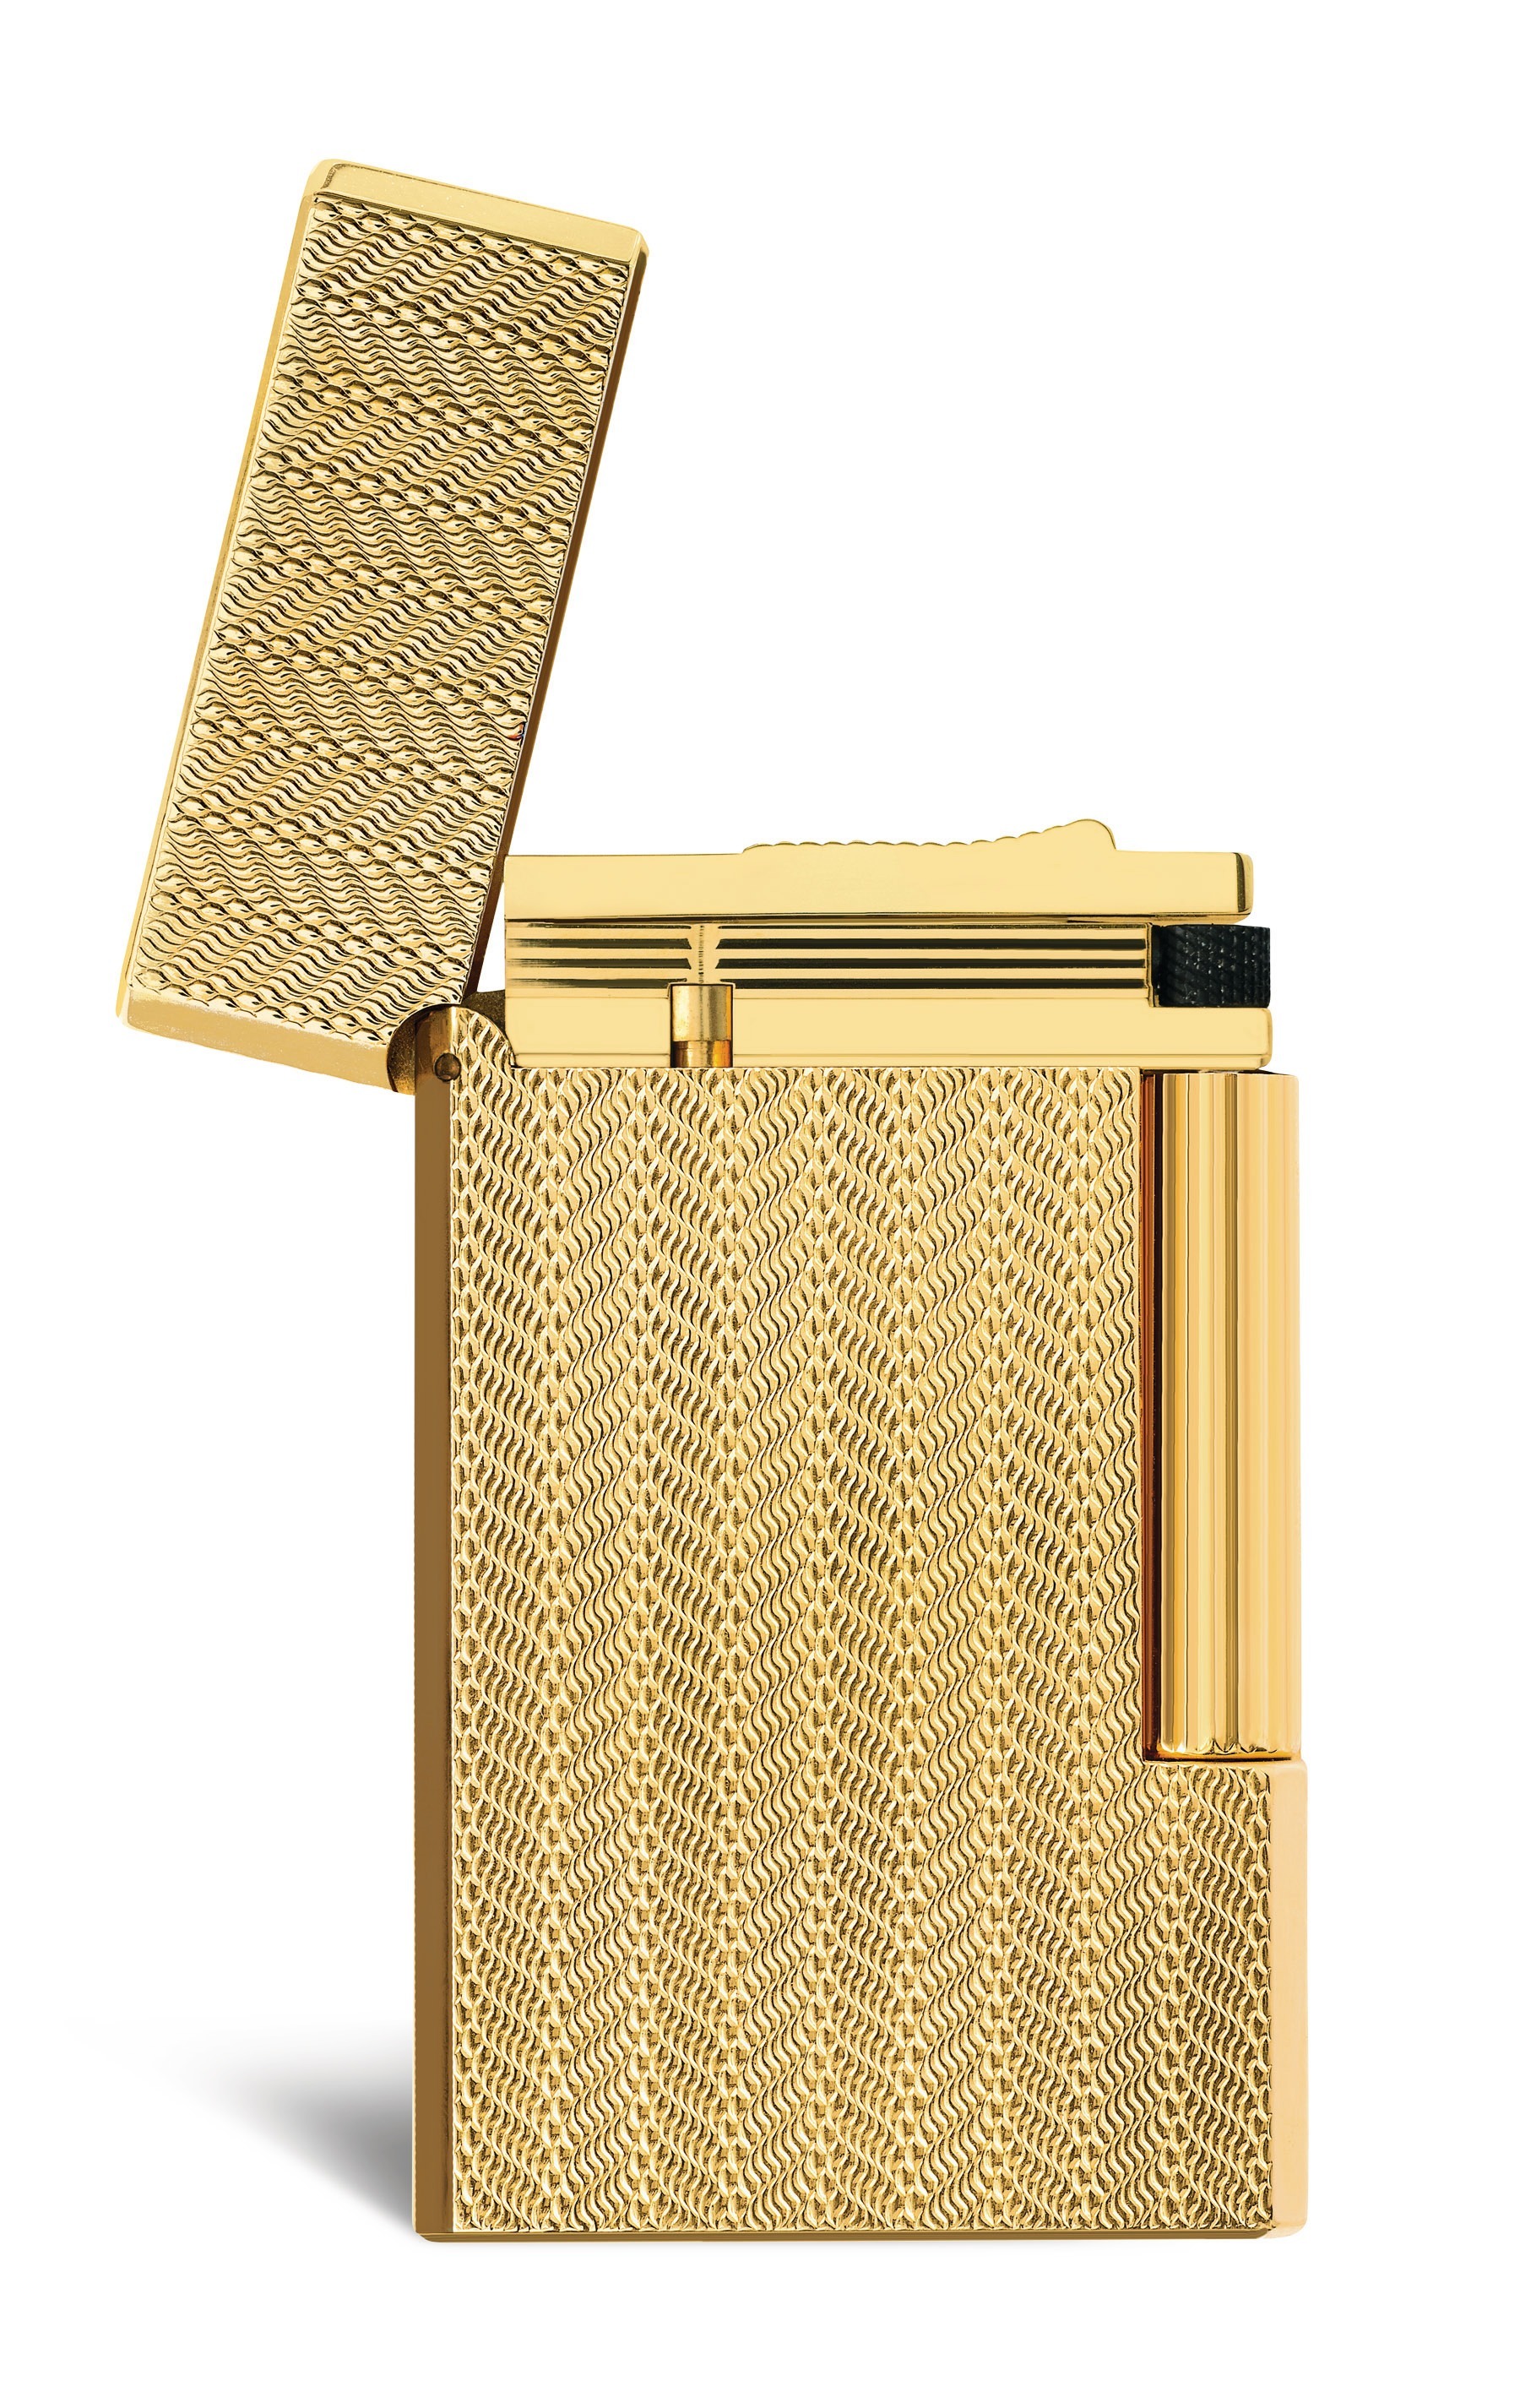 Davidoff Year of the Sheep gilded lighter